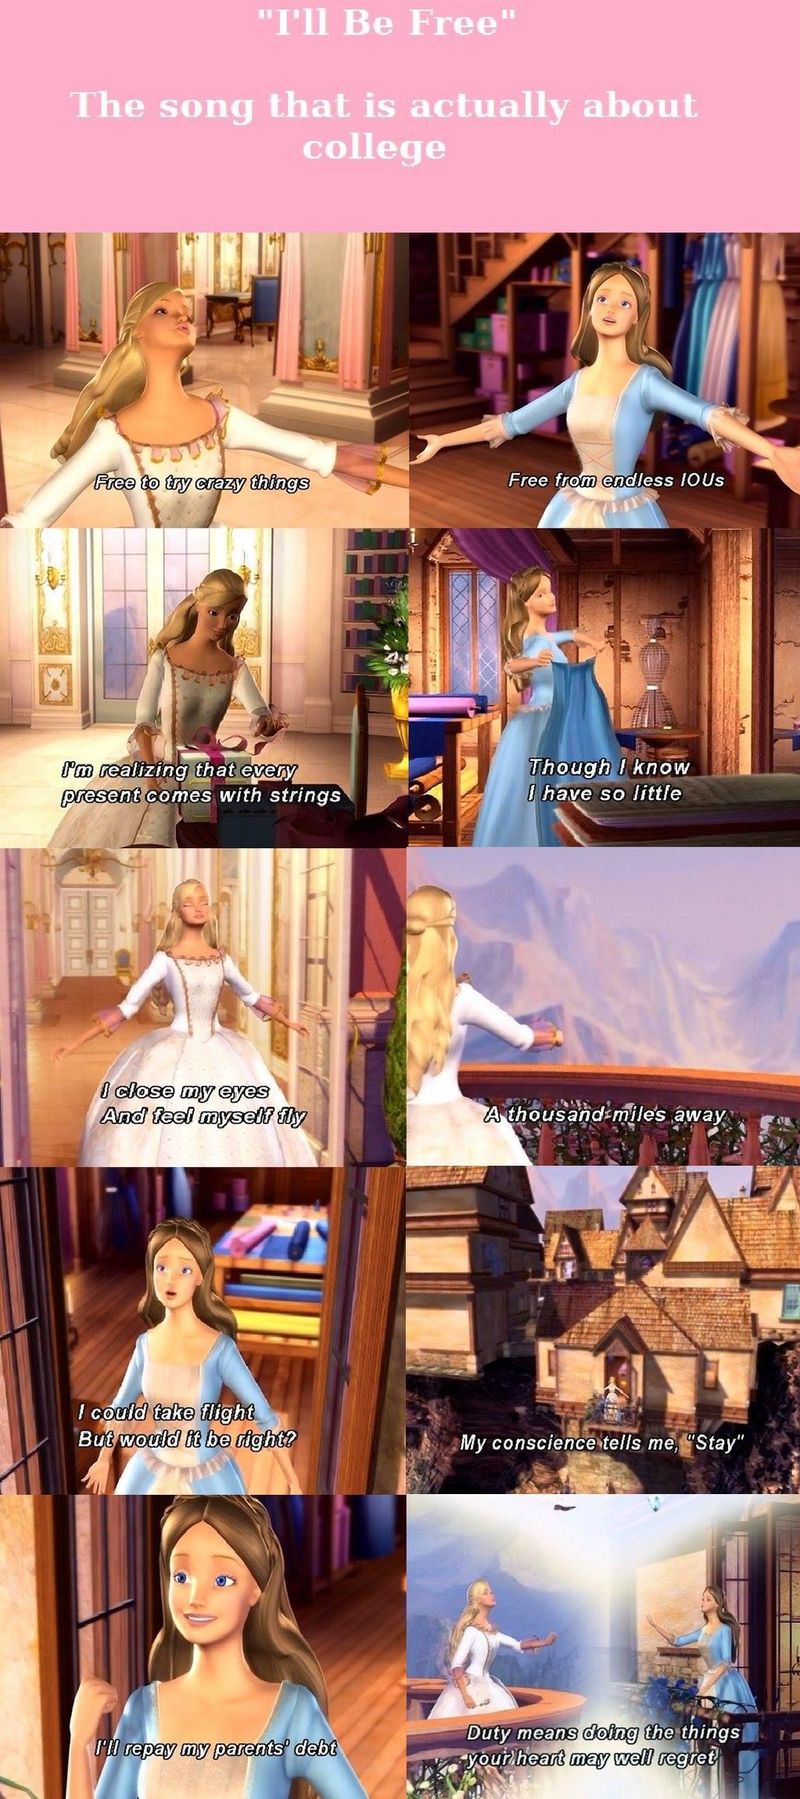 If the Barbie movie were made for college students